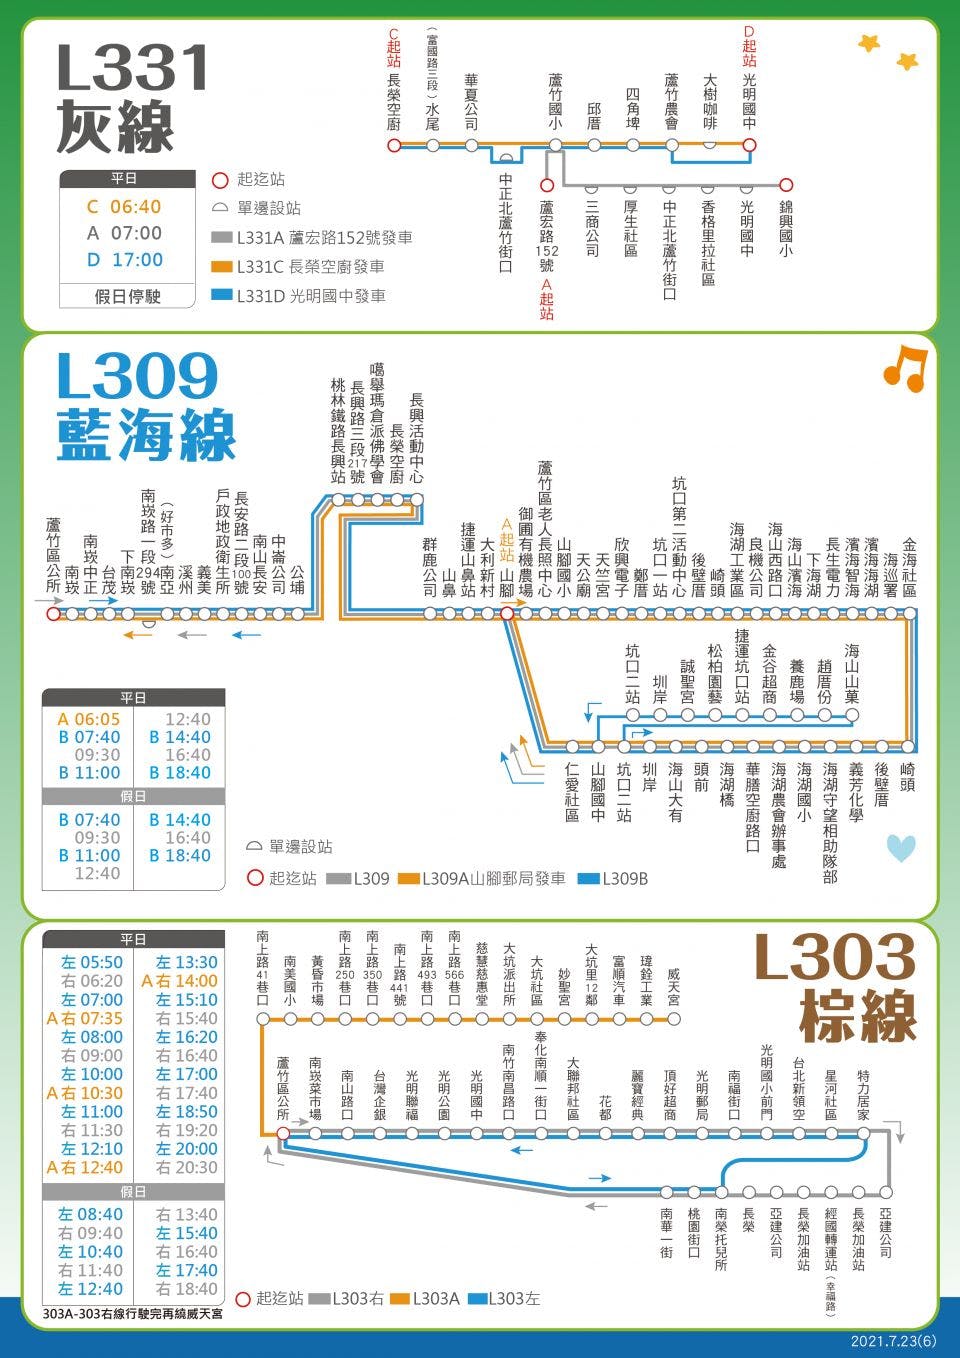 L303Route Map-桃園 Bus